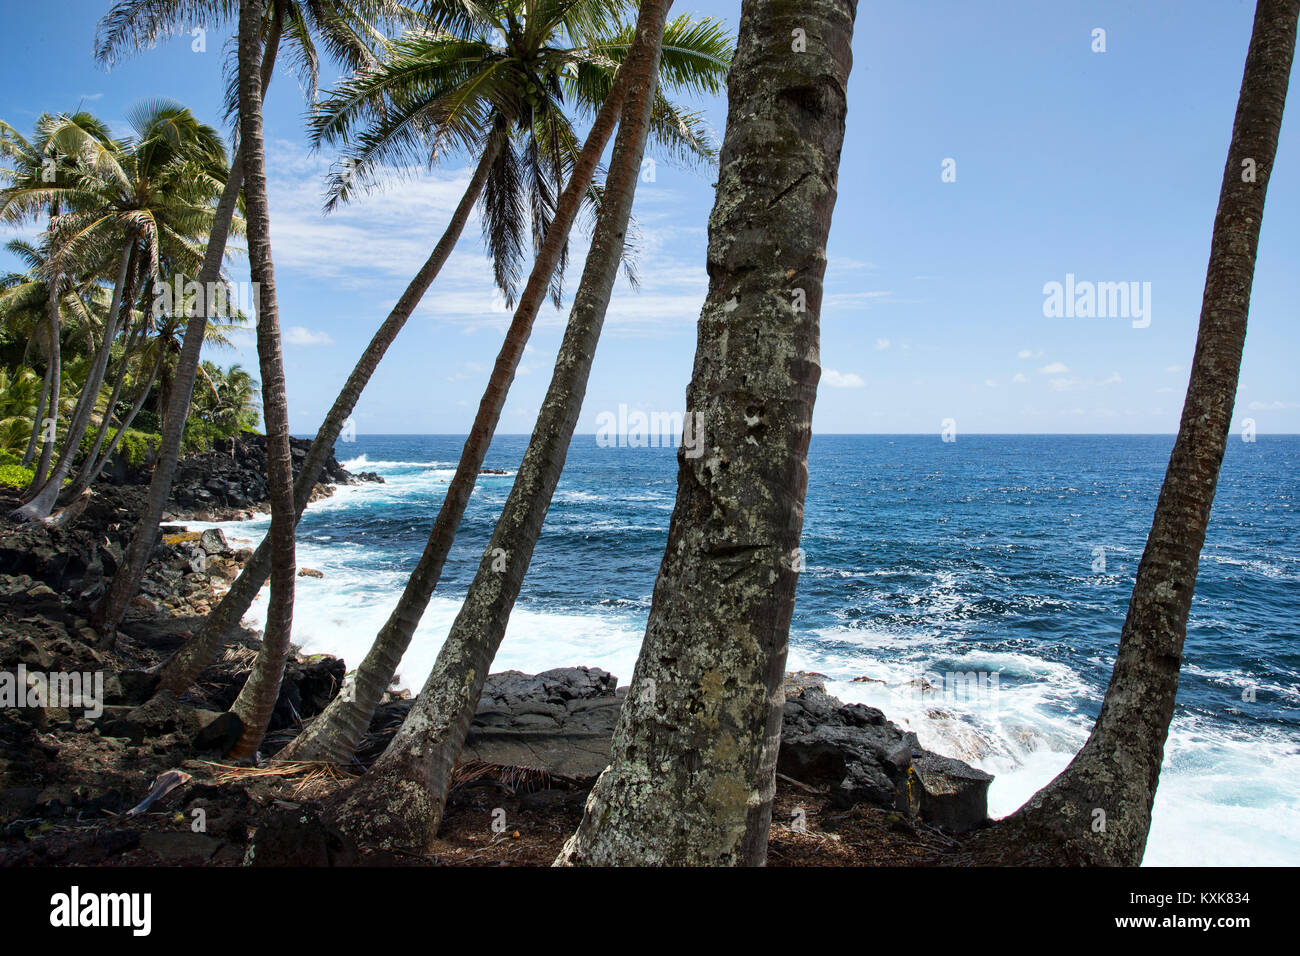 Hilo Hawaii rocky tropical beach shore pan. Vacation destination. Big Island, largest, most volcanic active location. Economy is tourism based. Water. Stock Photo